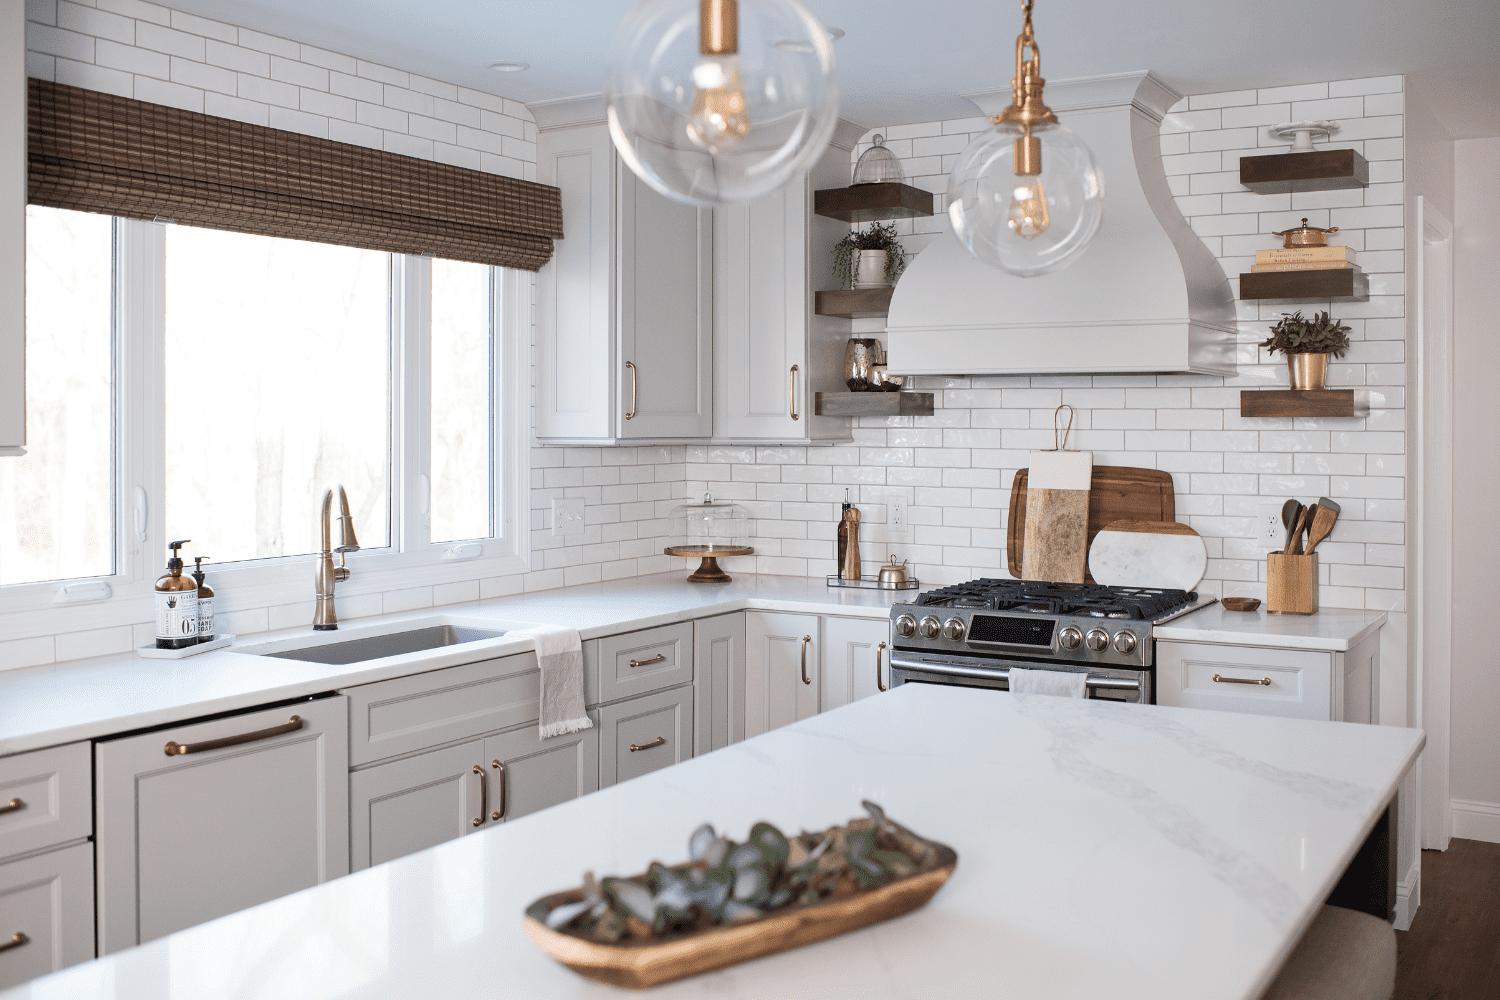 Nicholas Design Build | A neutral kitchen with white cabinets and gold accents.